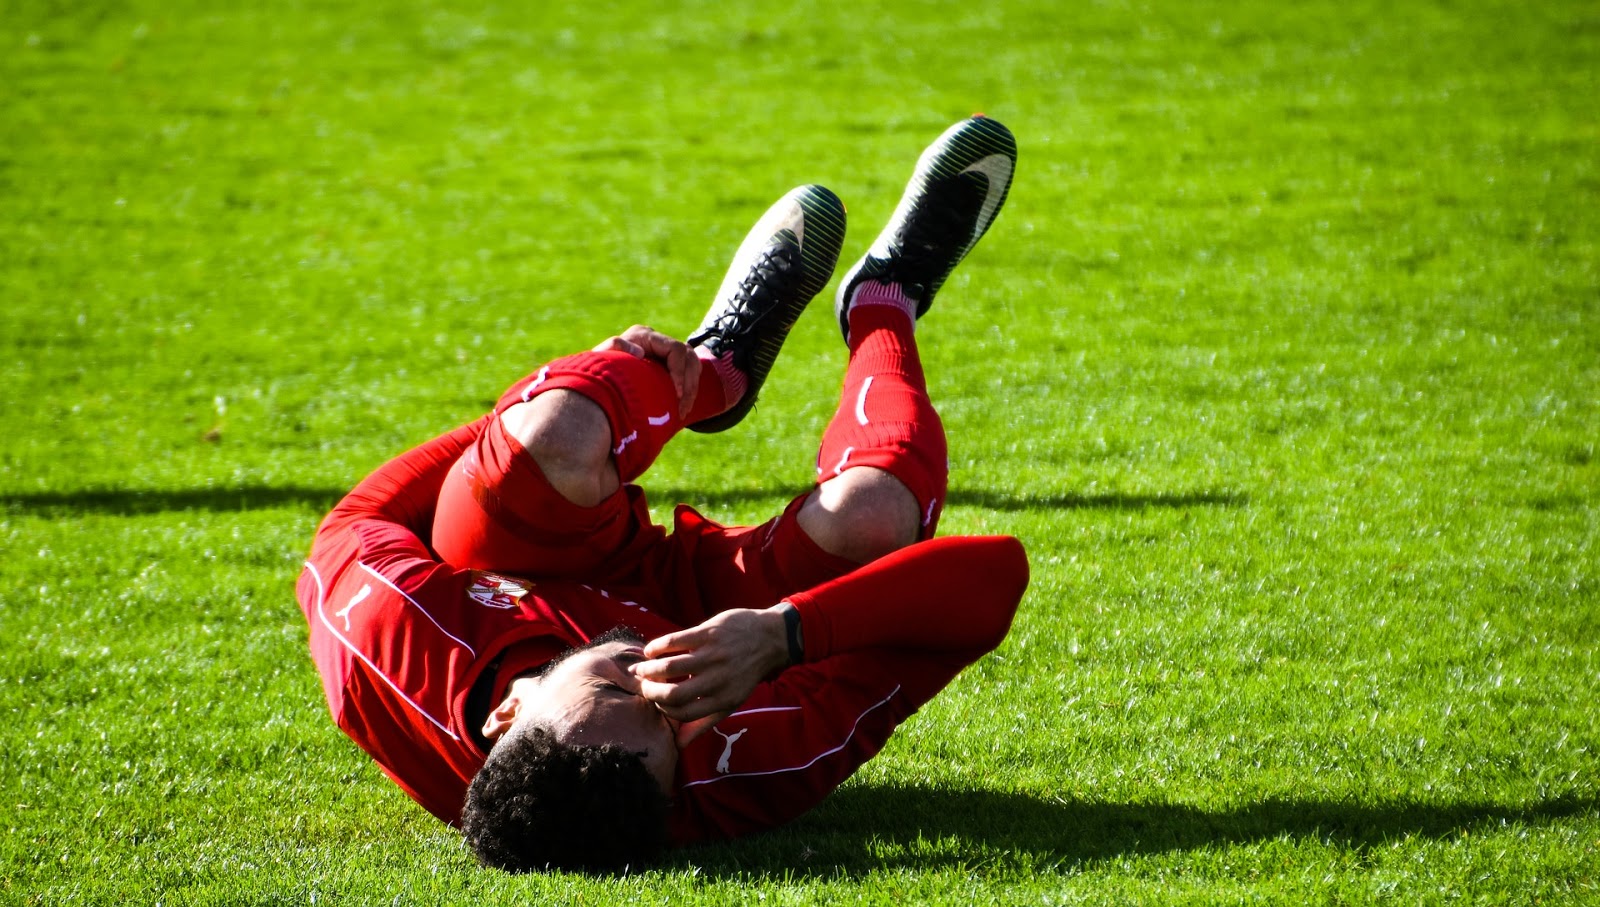 The Most Common Sports Injuries and What To Do About Them